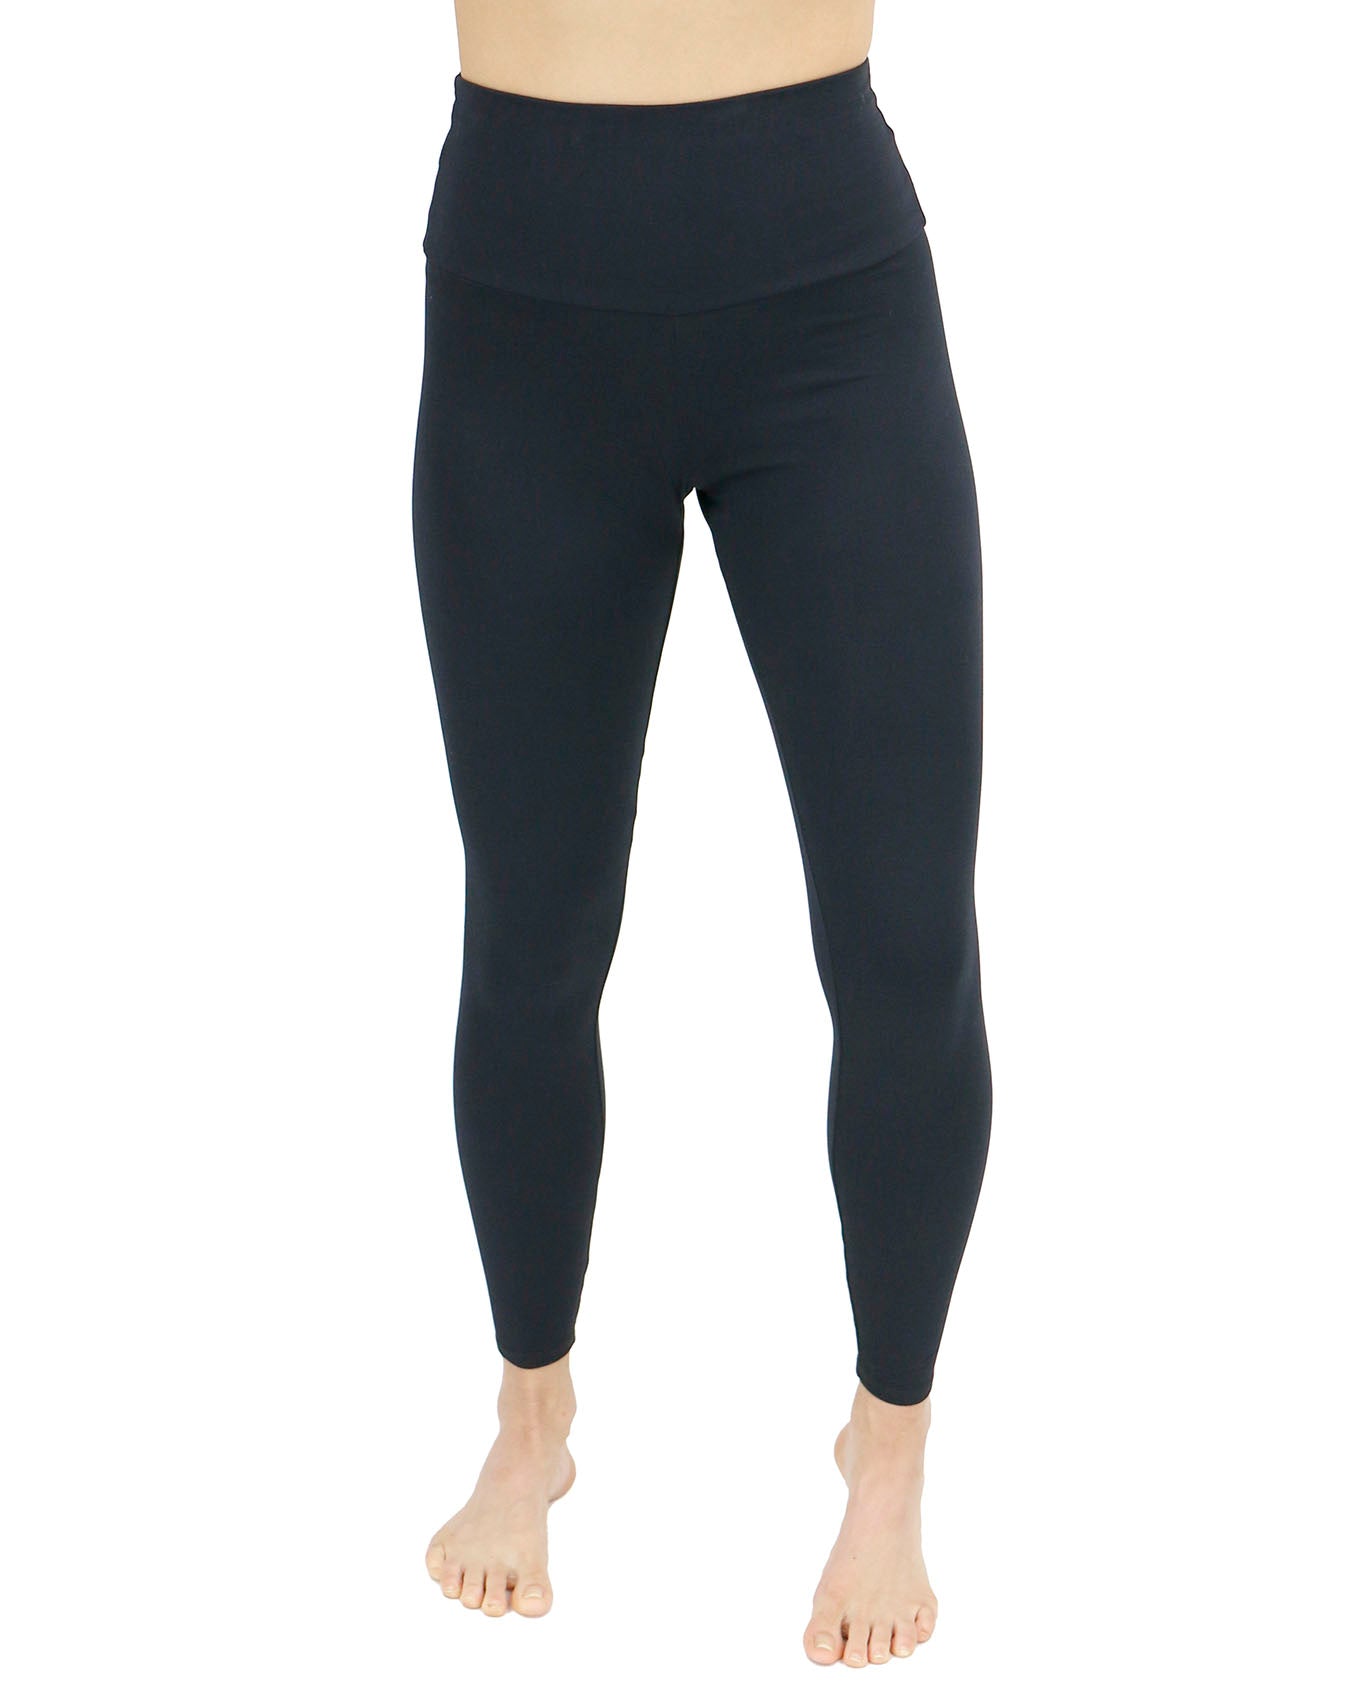 90 Degree By Reflex, Pants & Jumpsuits, 9 Degree By Reflex High Rise Pocket  Leggings Size Xs